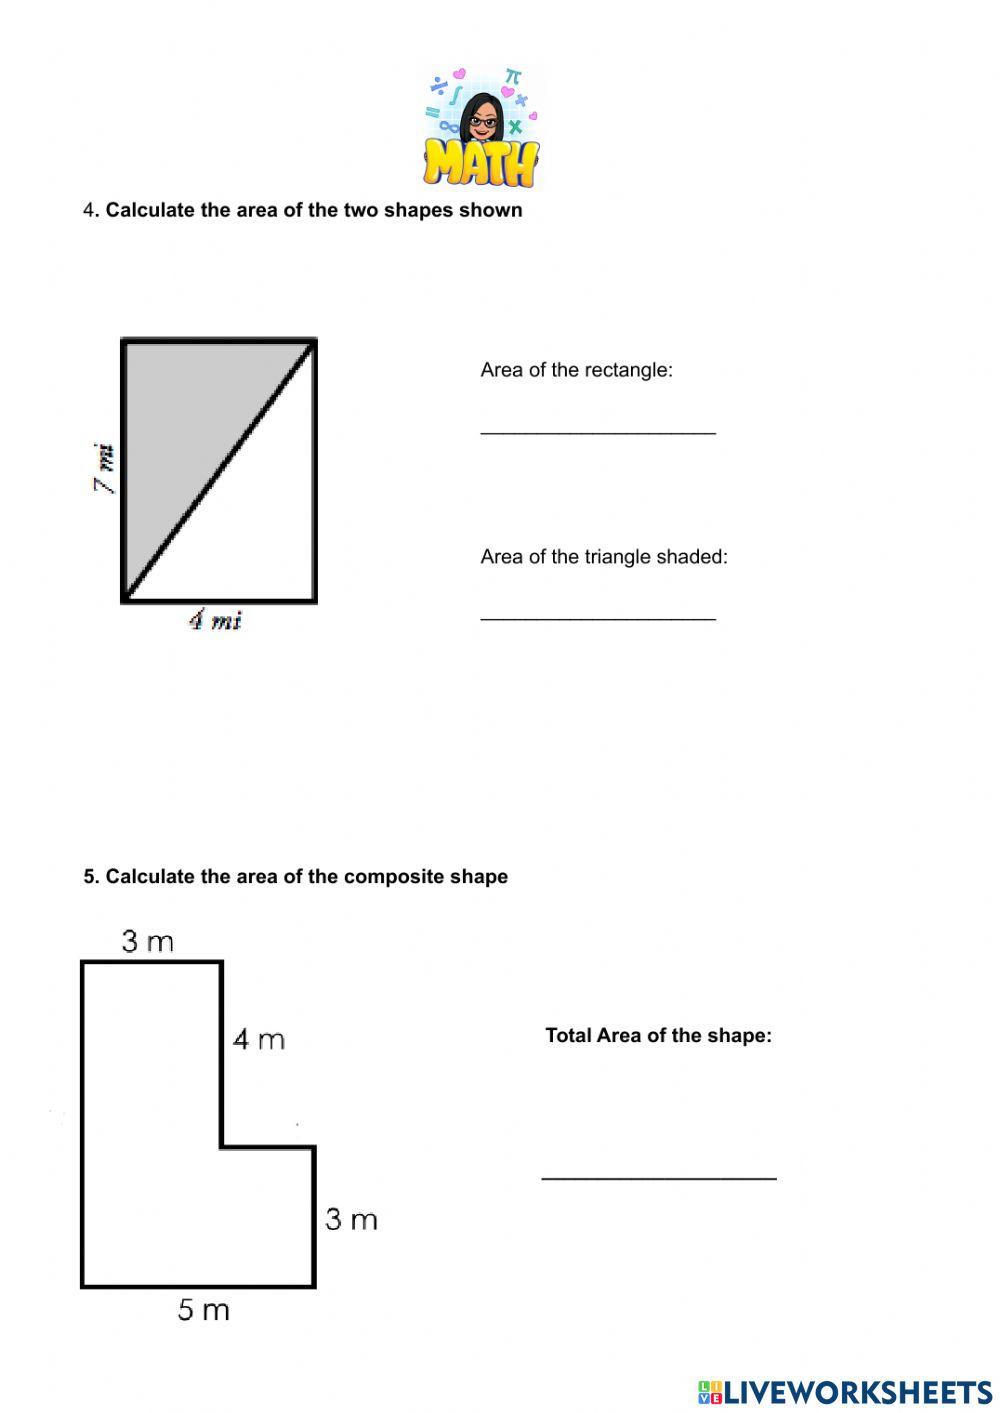 Area of rectangles and triangles